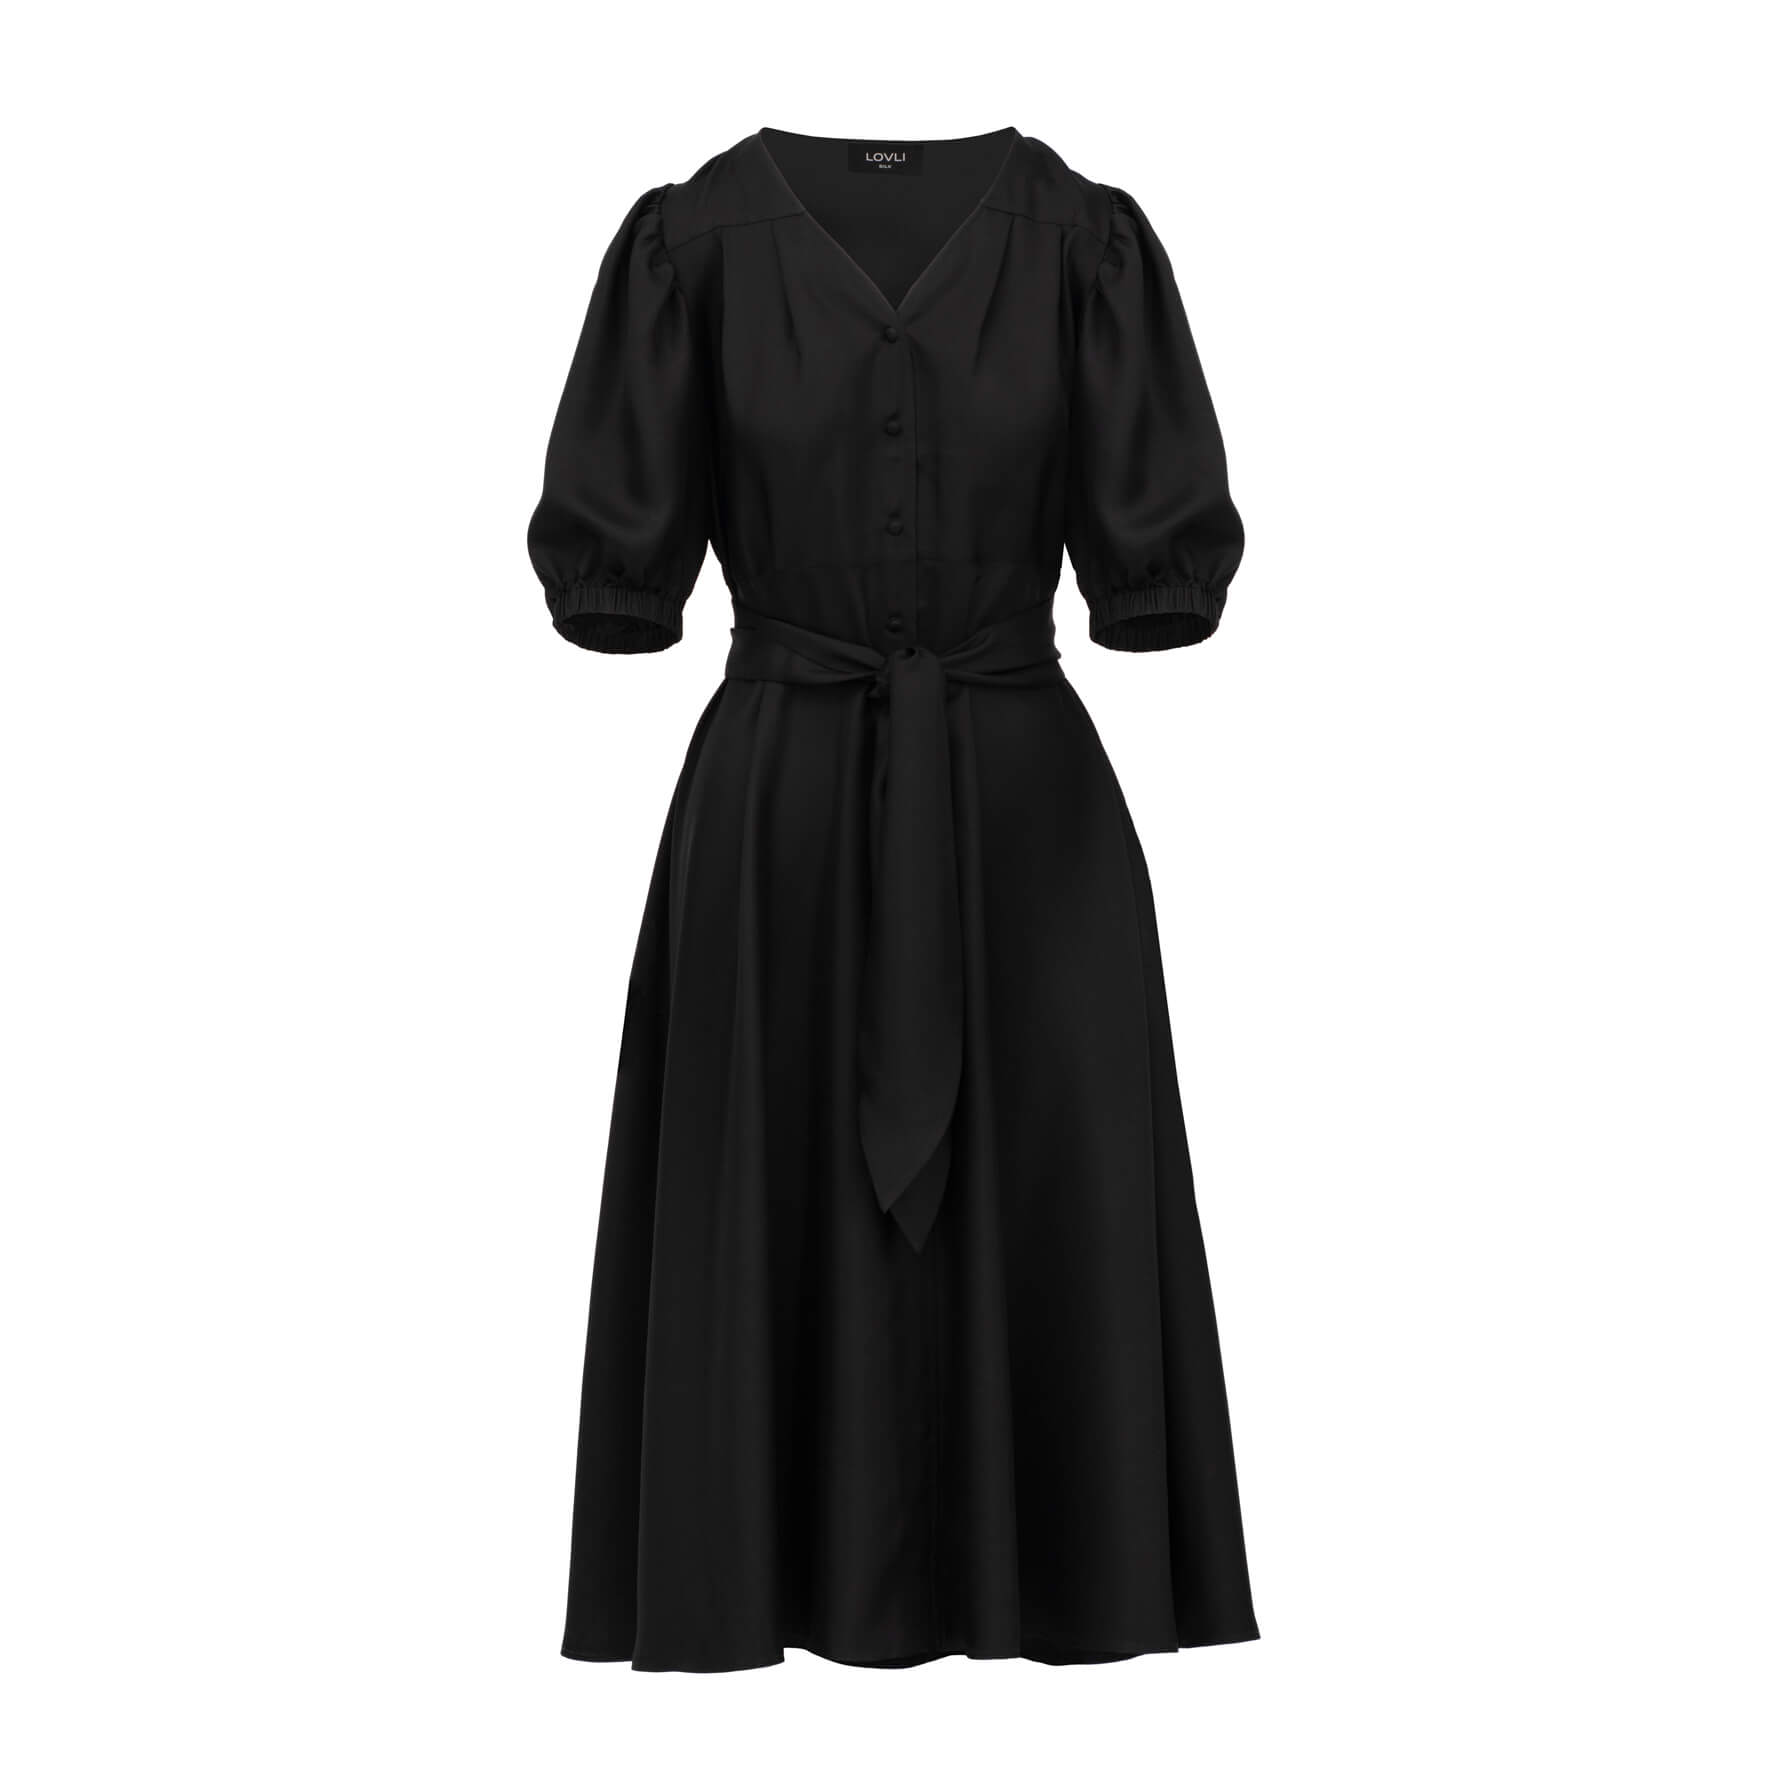 SILK DRESS WITH BUTTONS IN BLACK